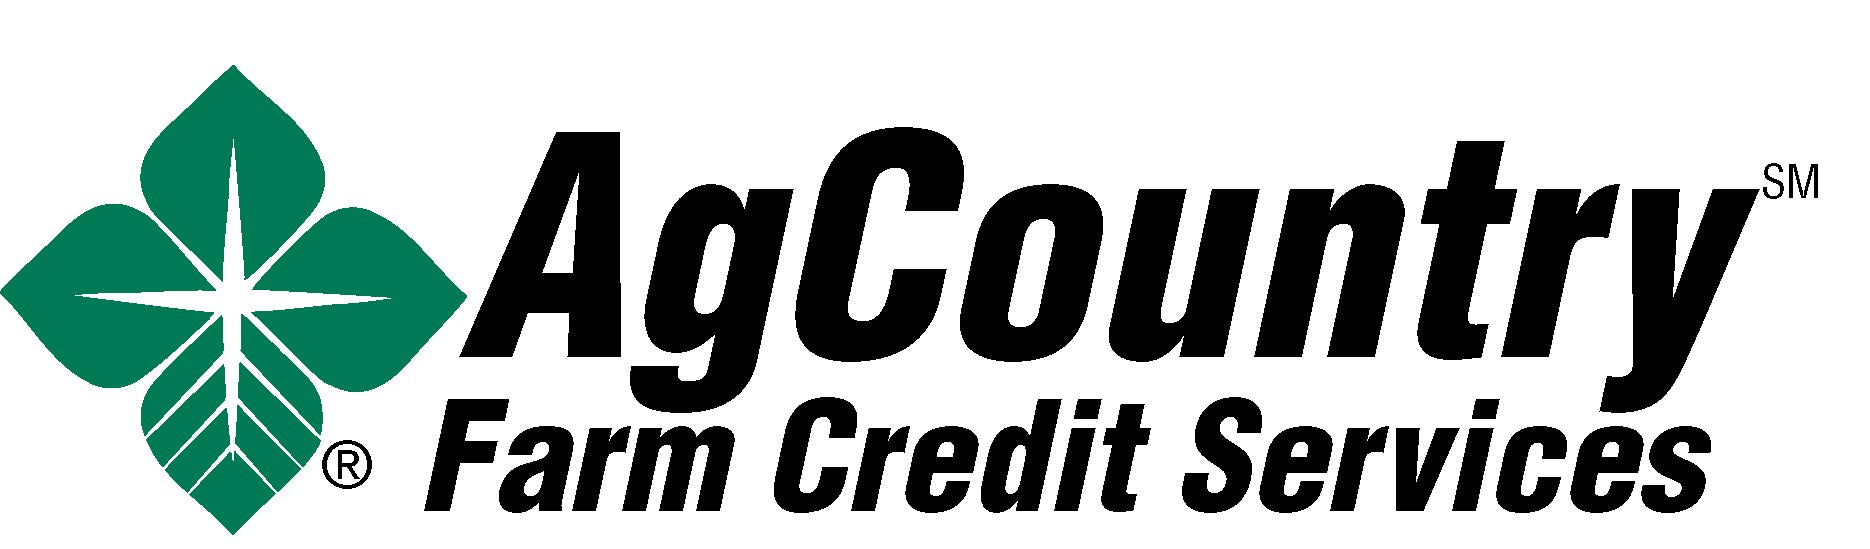 AgCountry Farm Credit Service's Image